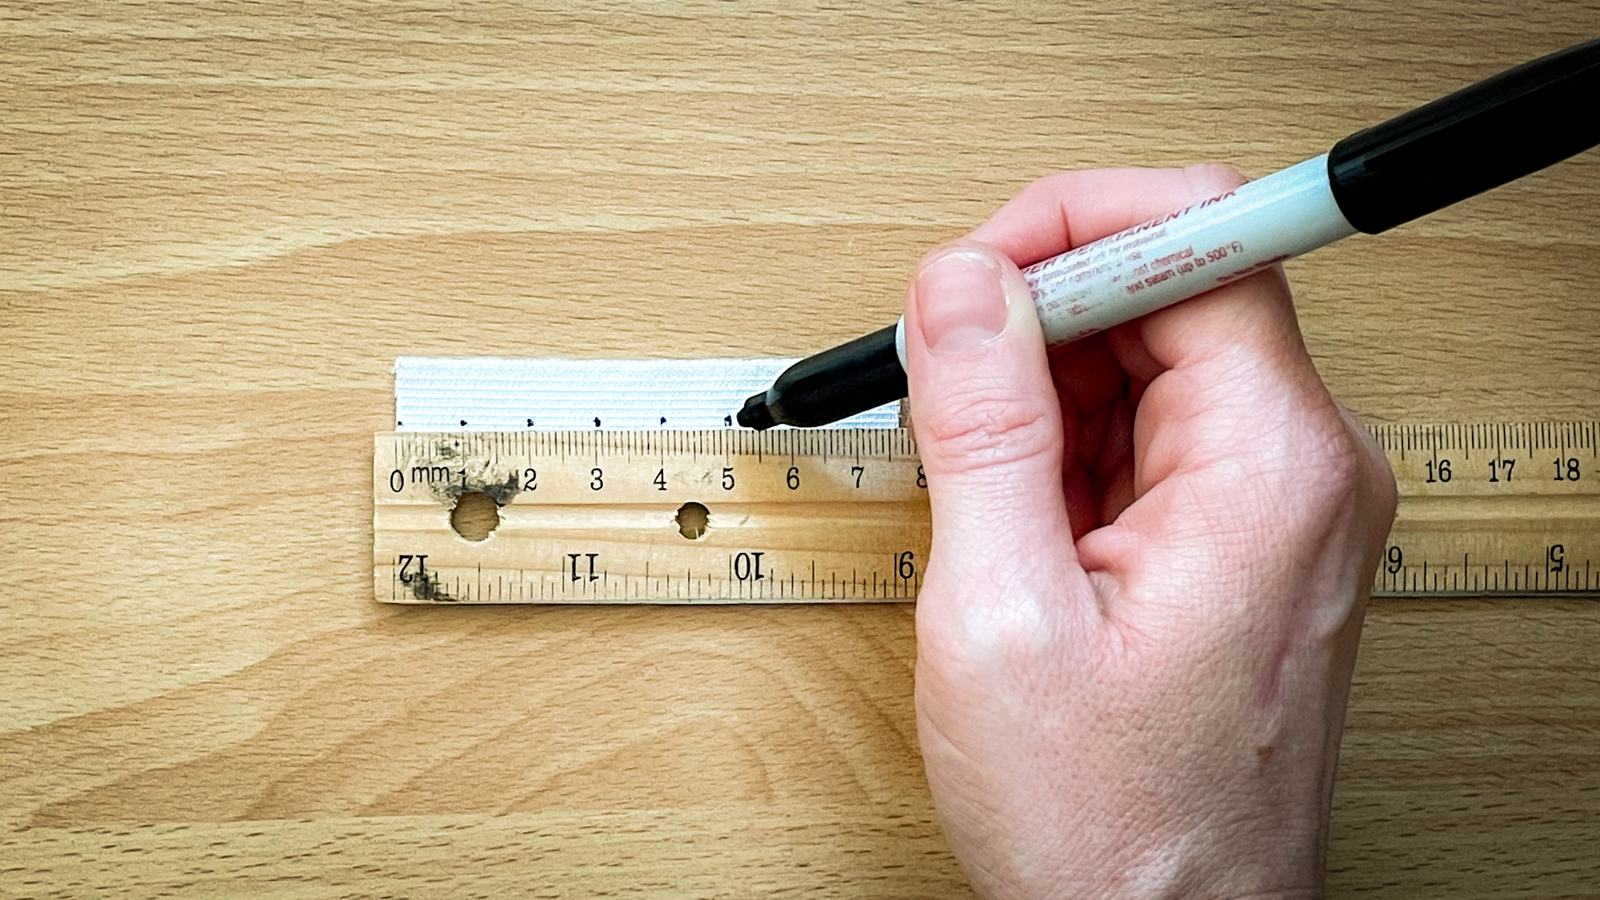 A person uses a ruler to draws evenly spaced dots on a strip of elastic.